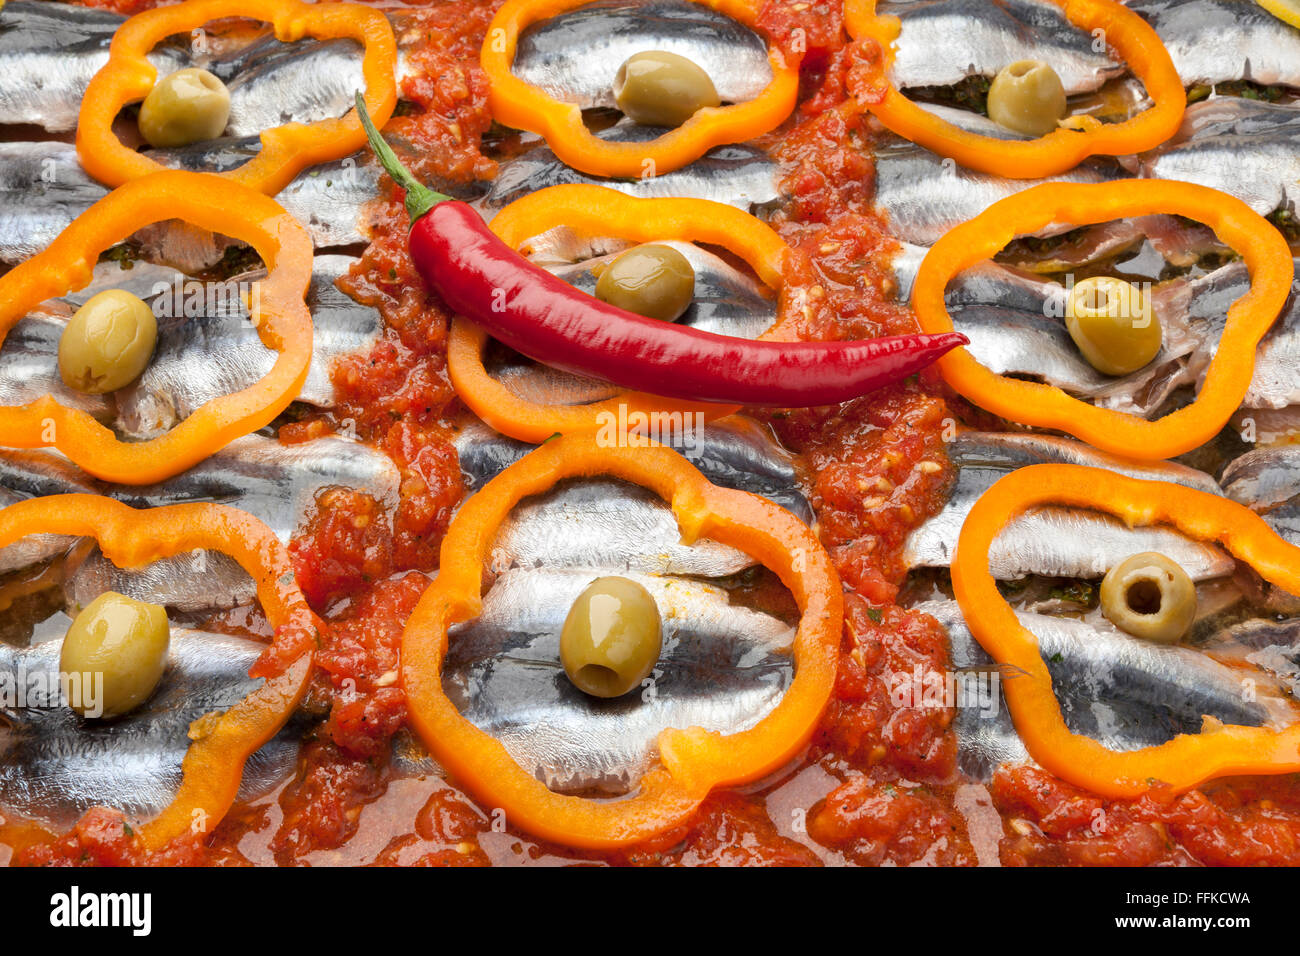 Traditional Moroccan sardine dish recipe with olives, bell peppers and chili pepper full frame Stock Photo